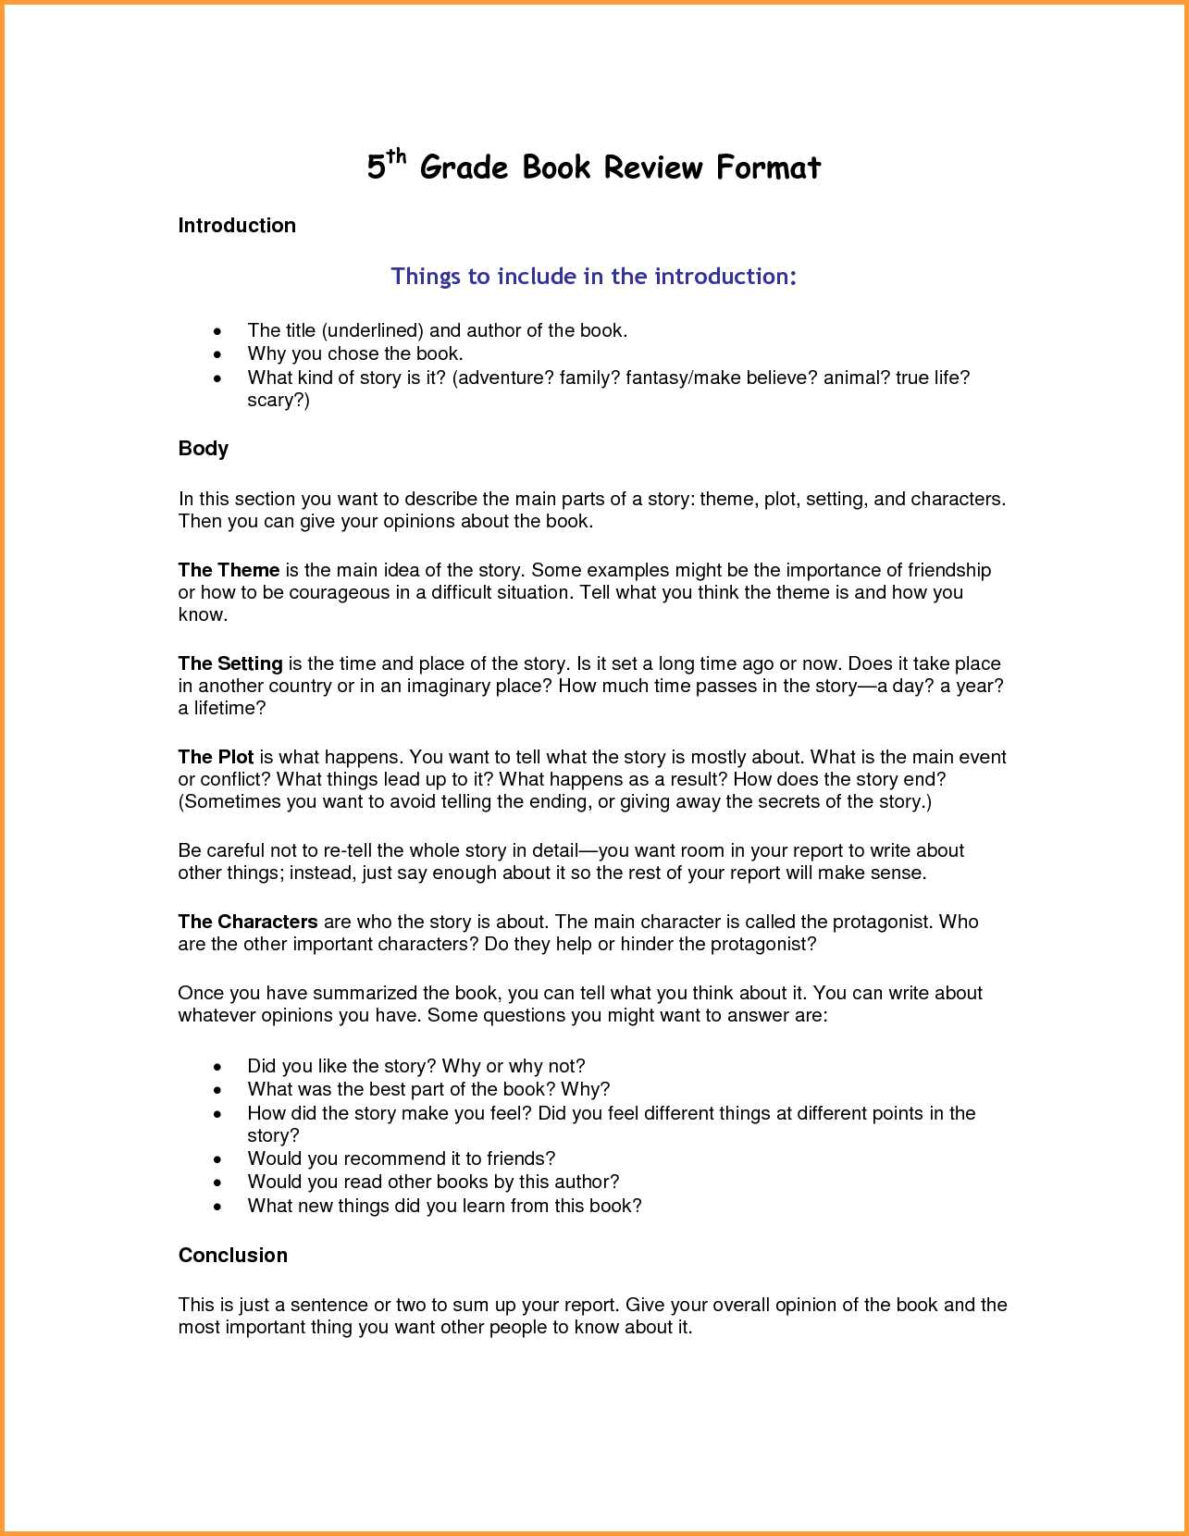 how to write a book report for 5th grade